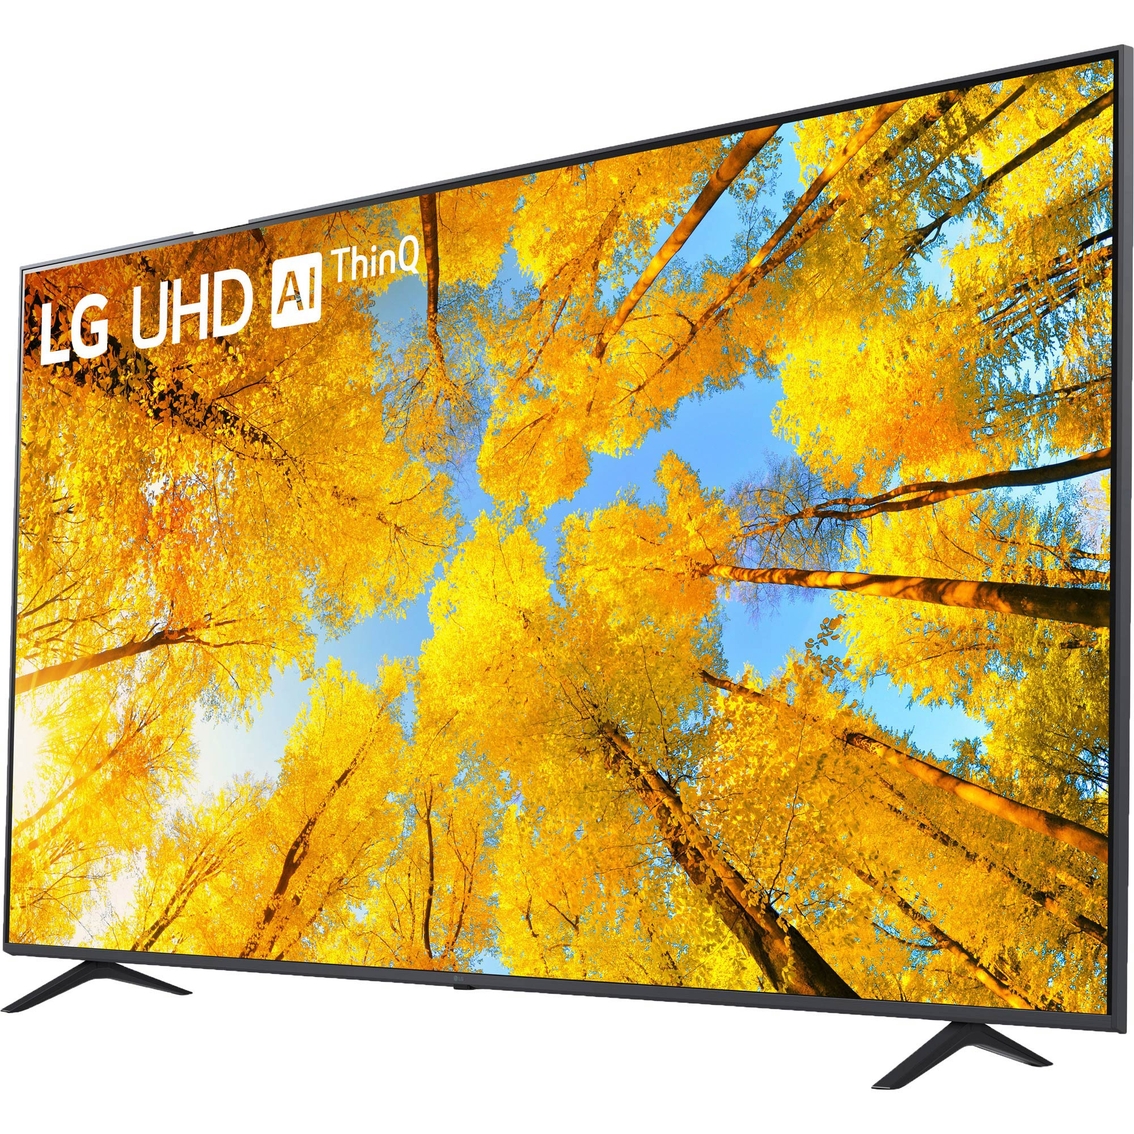 LG 75 in. 4K HDR Smart TV with AI ThinQ 75UQ7590PUB - Image 3 of 9